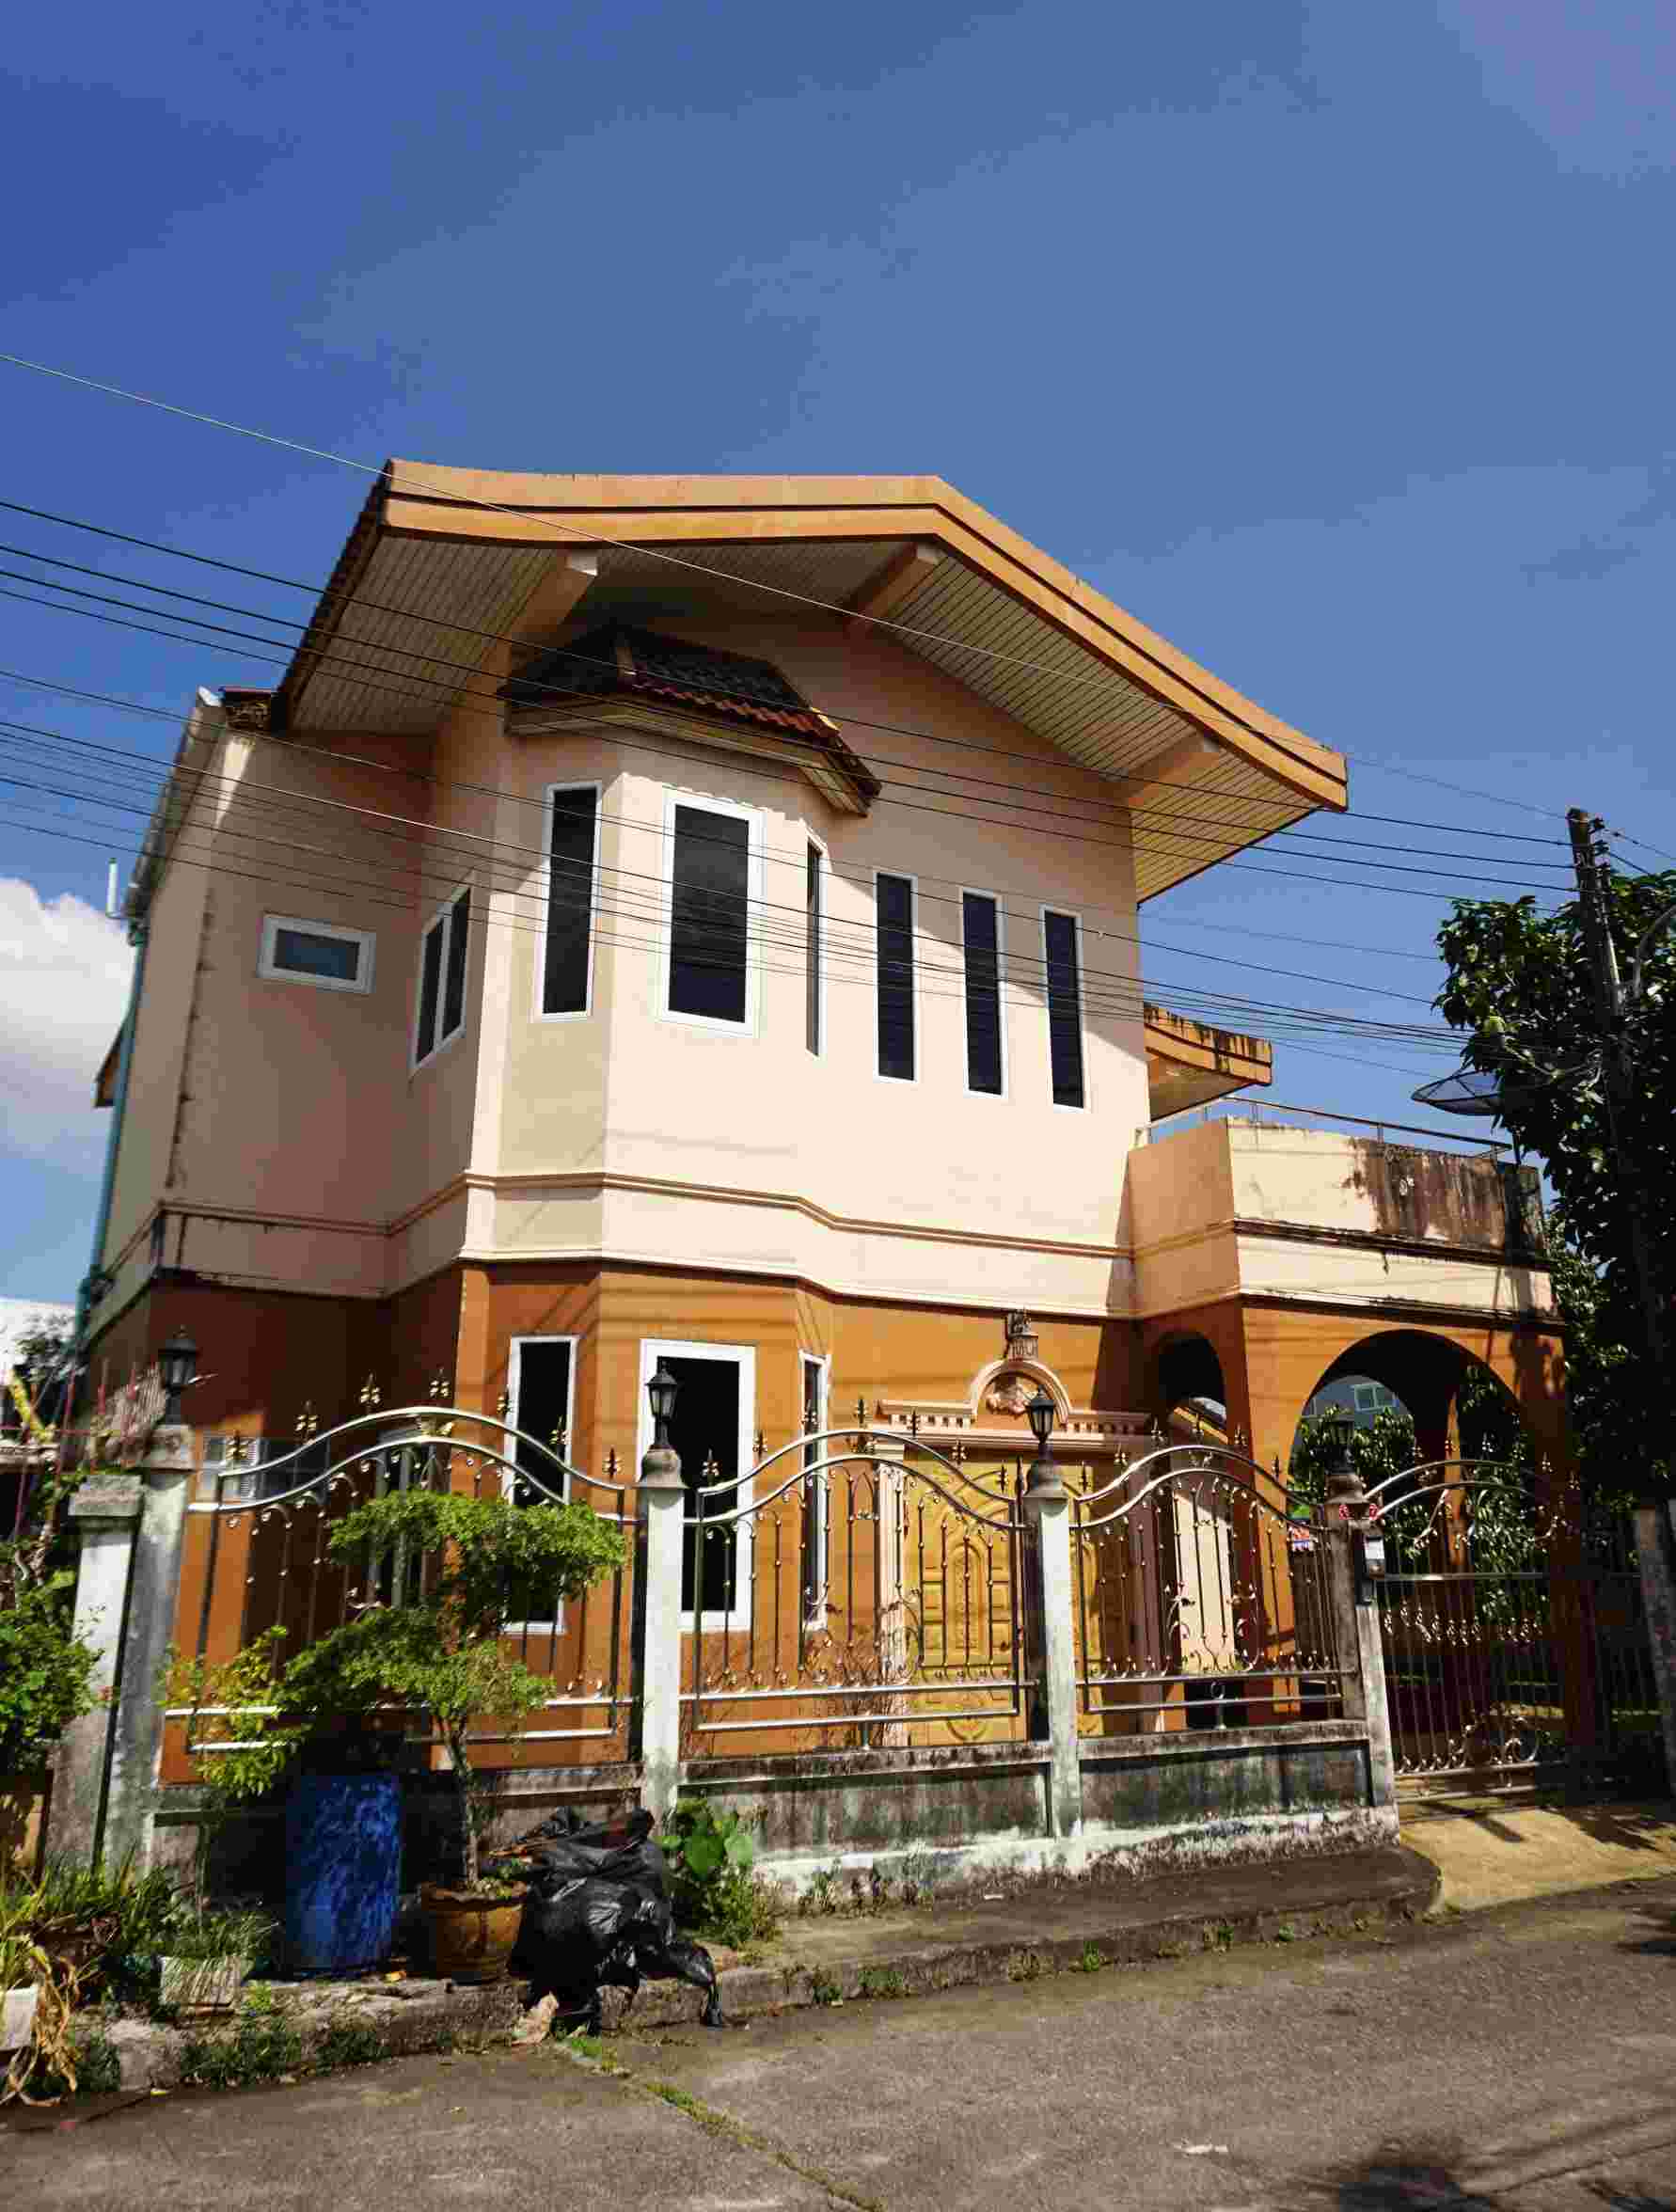 For sale: 2-storey detached house with land 80 sq m. Anuphas Village Manorom 1, Wichit Zone, Mueang 